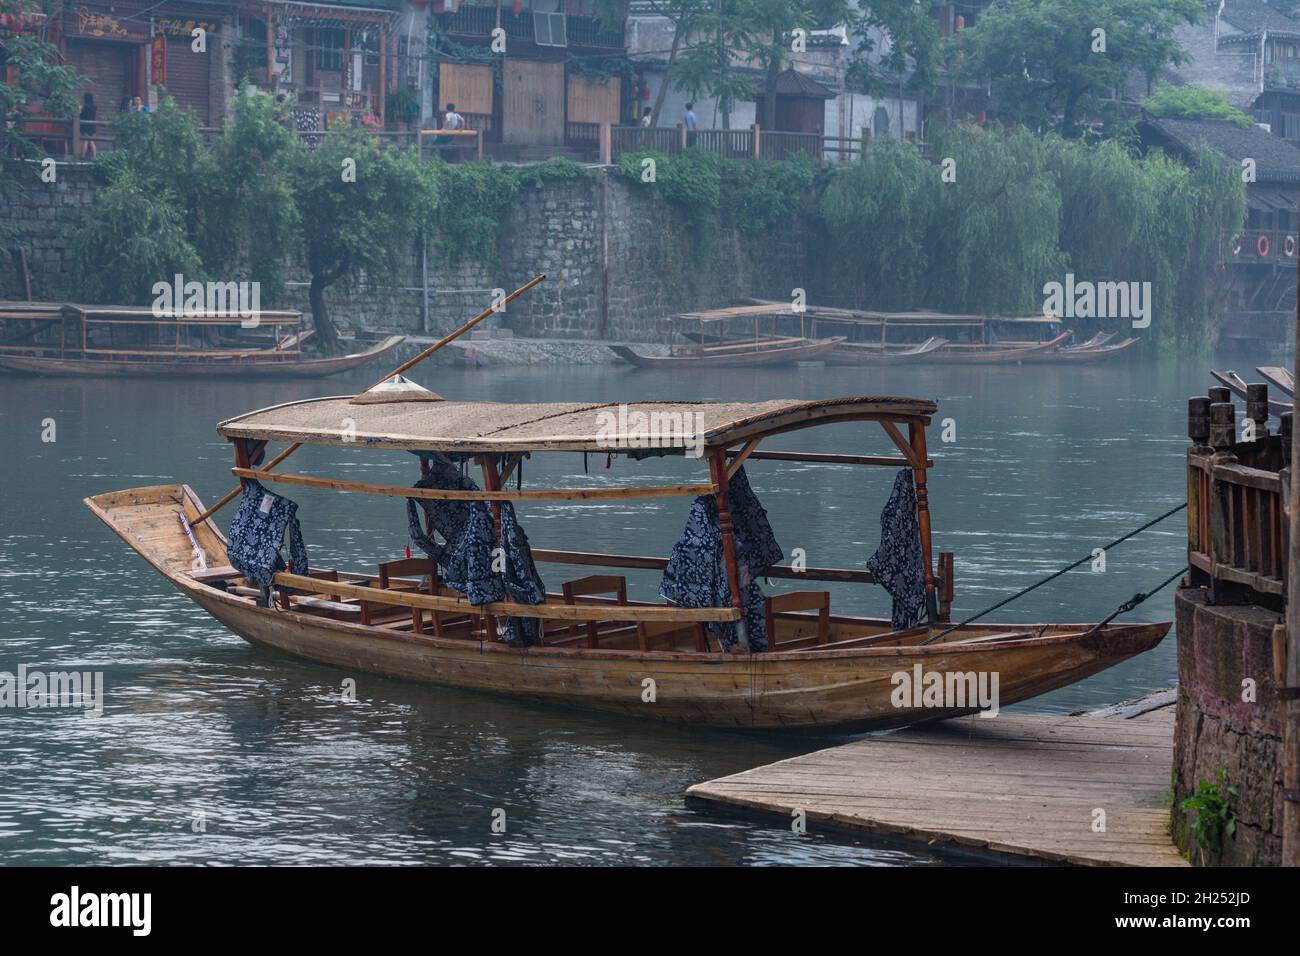 A covered tour boat docked on the Tuojiang River in Fenghuang, China, with a traditional conical hat on top. Stock Photo